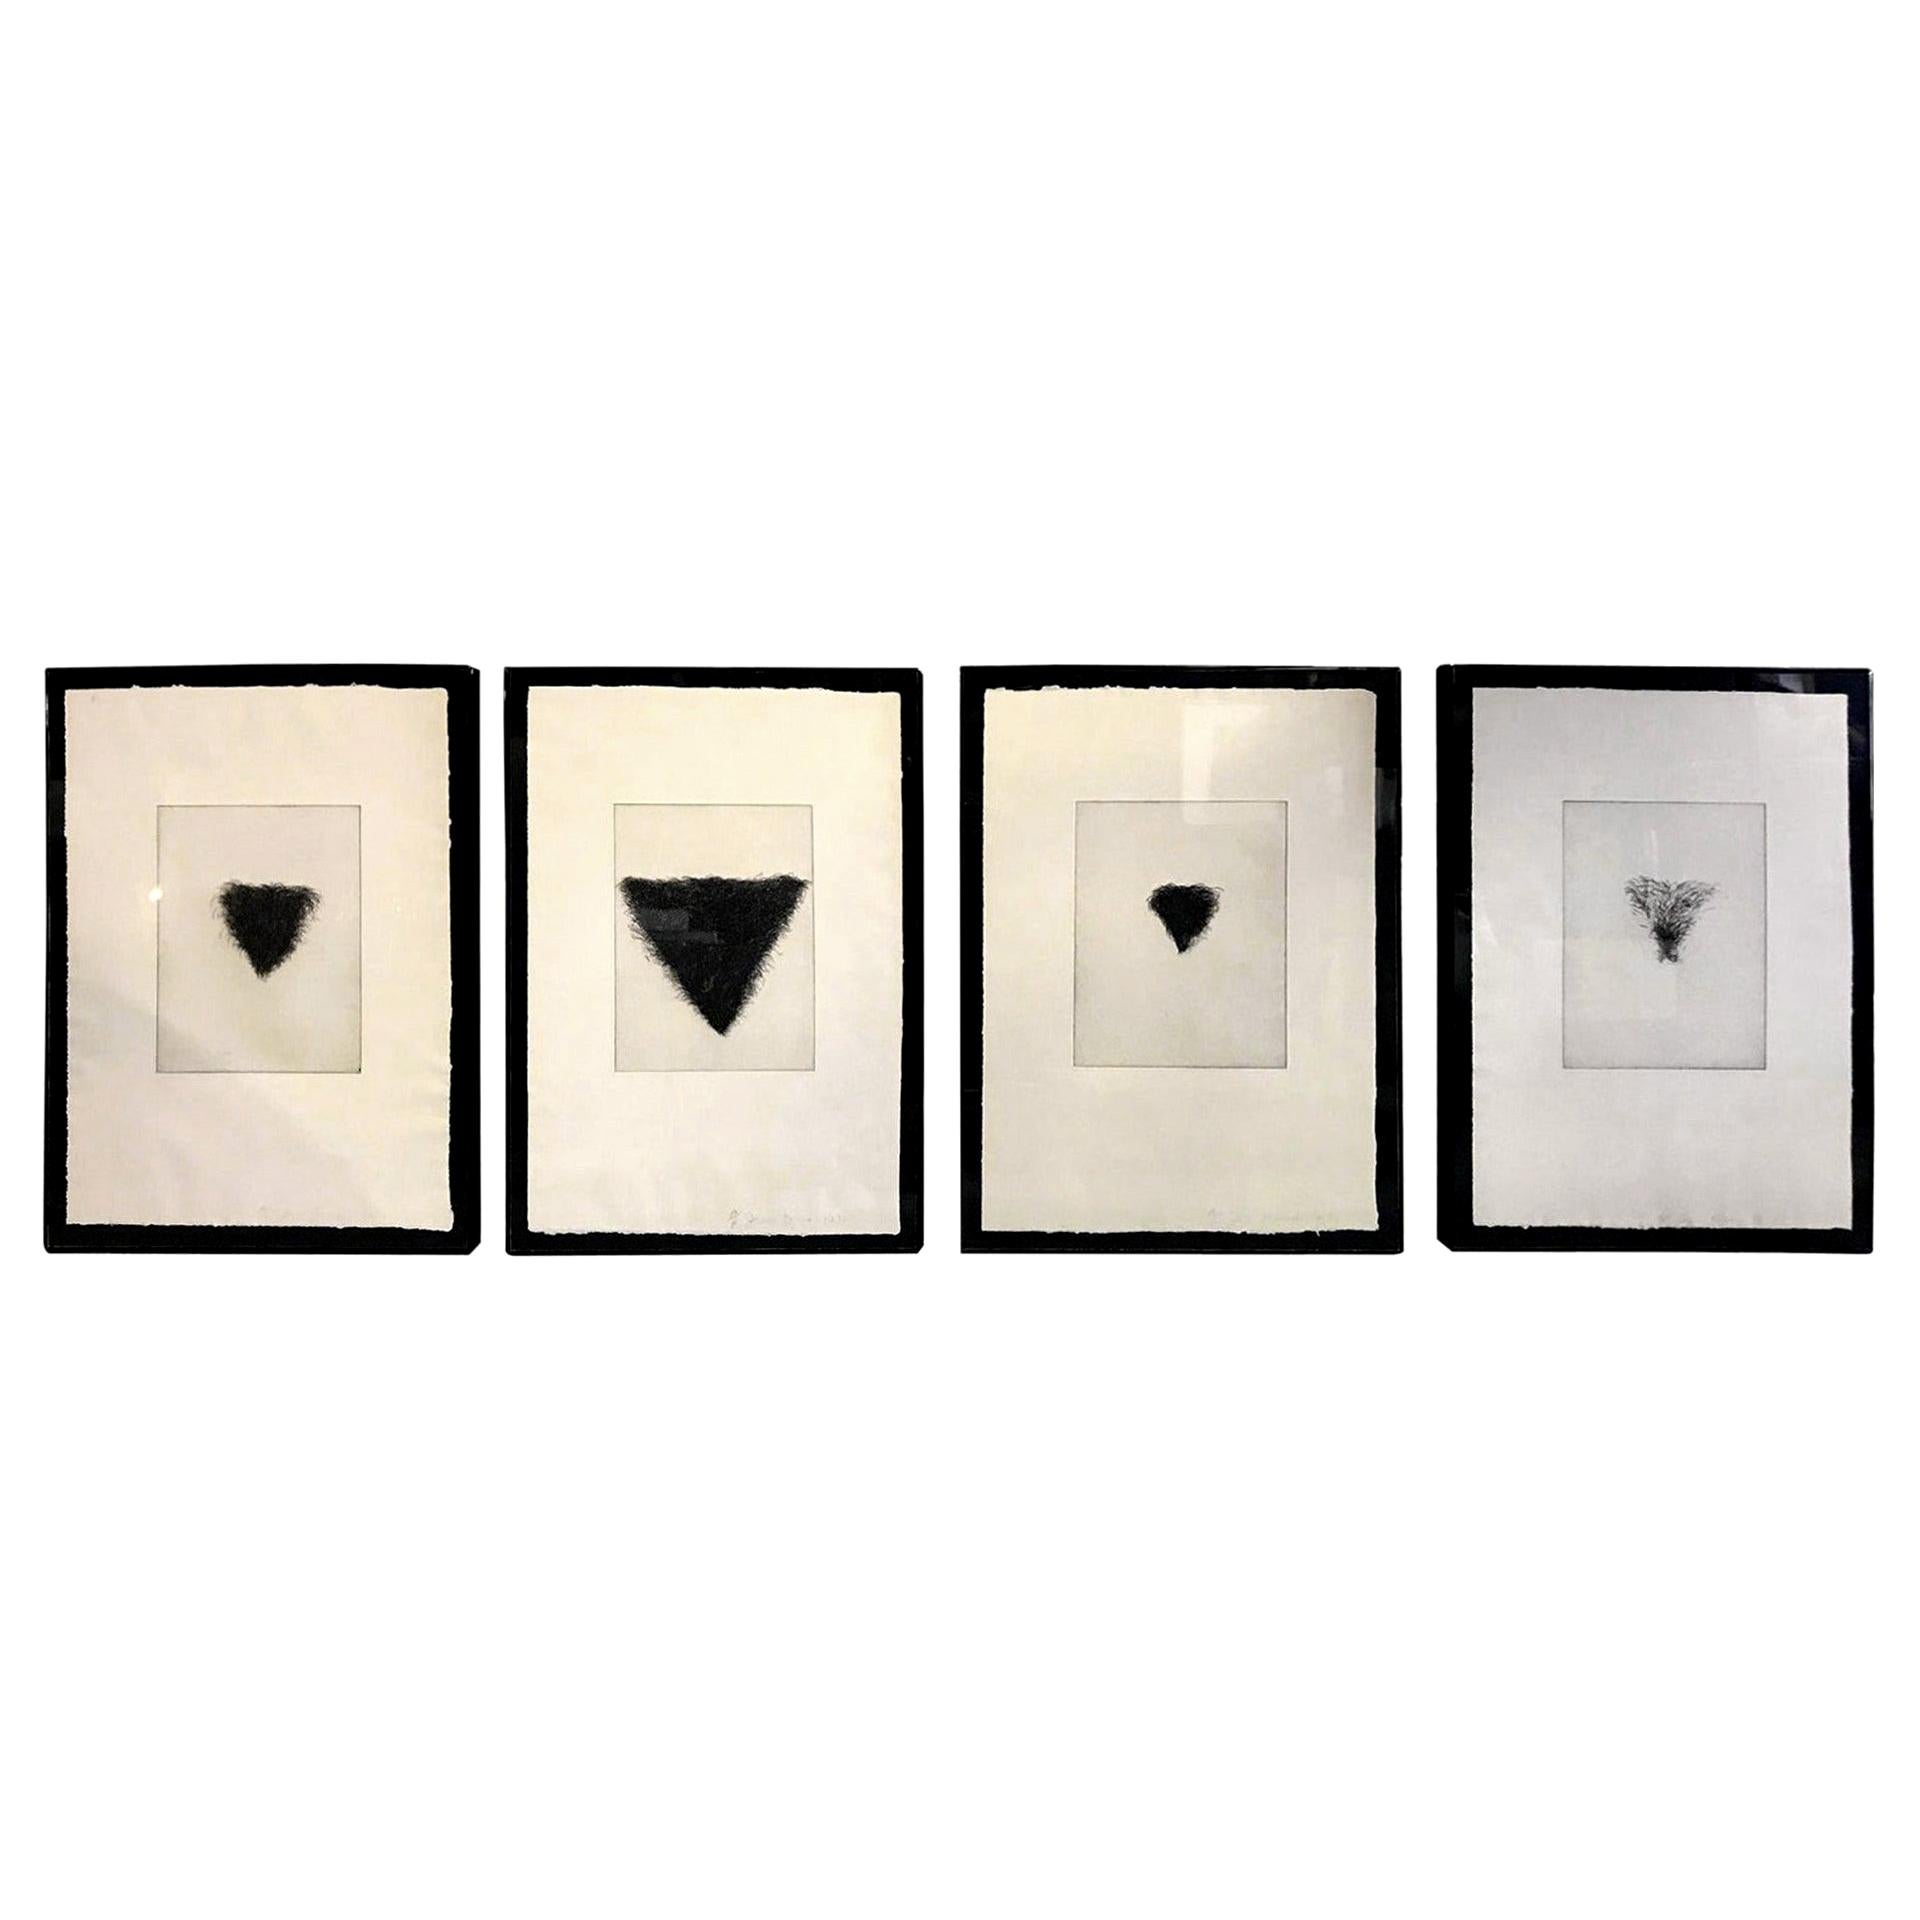 Jim Dine Signed Set of Four Pop Art Etchings "Four Kinds of Pubic Hair", 1971